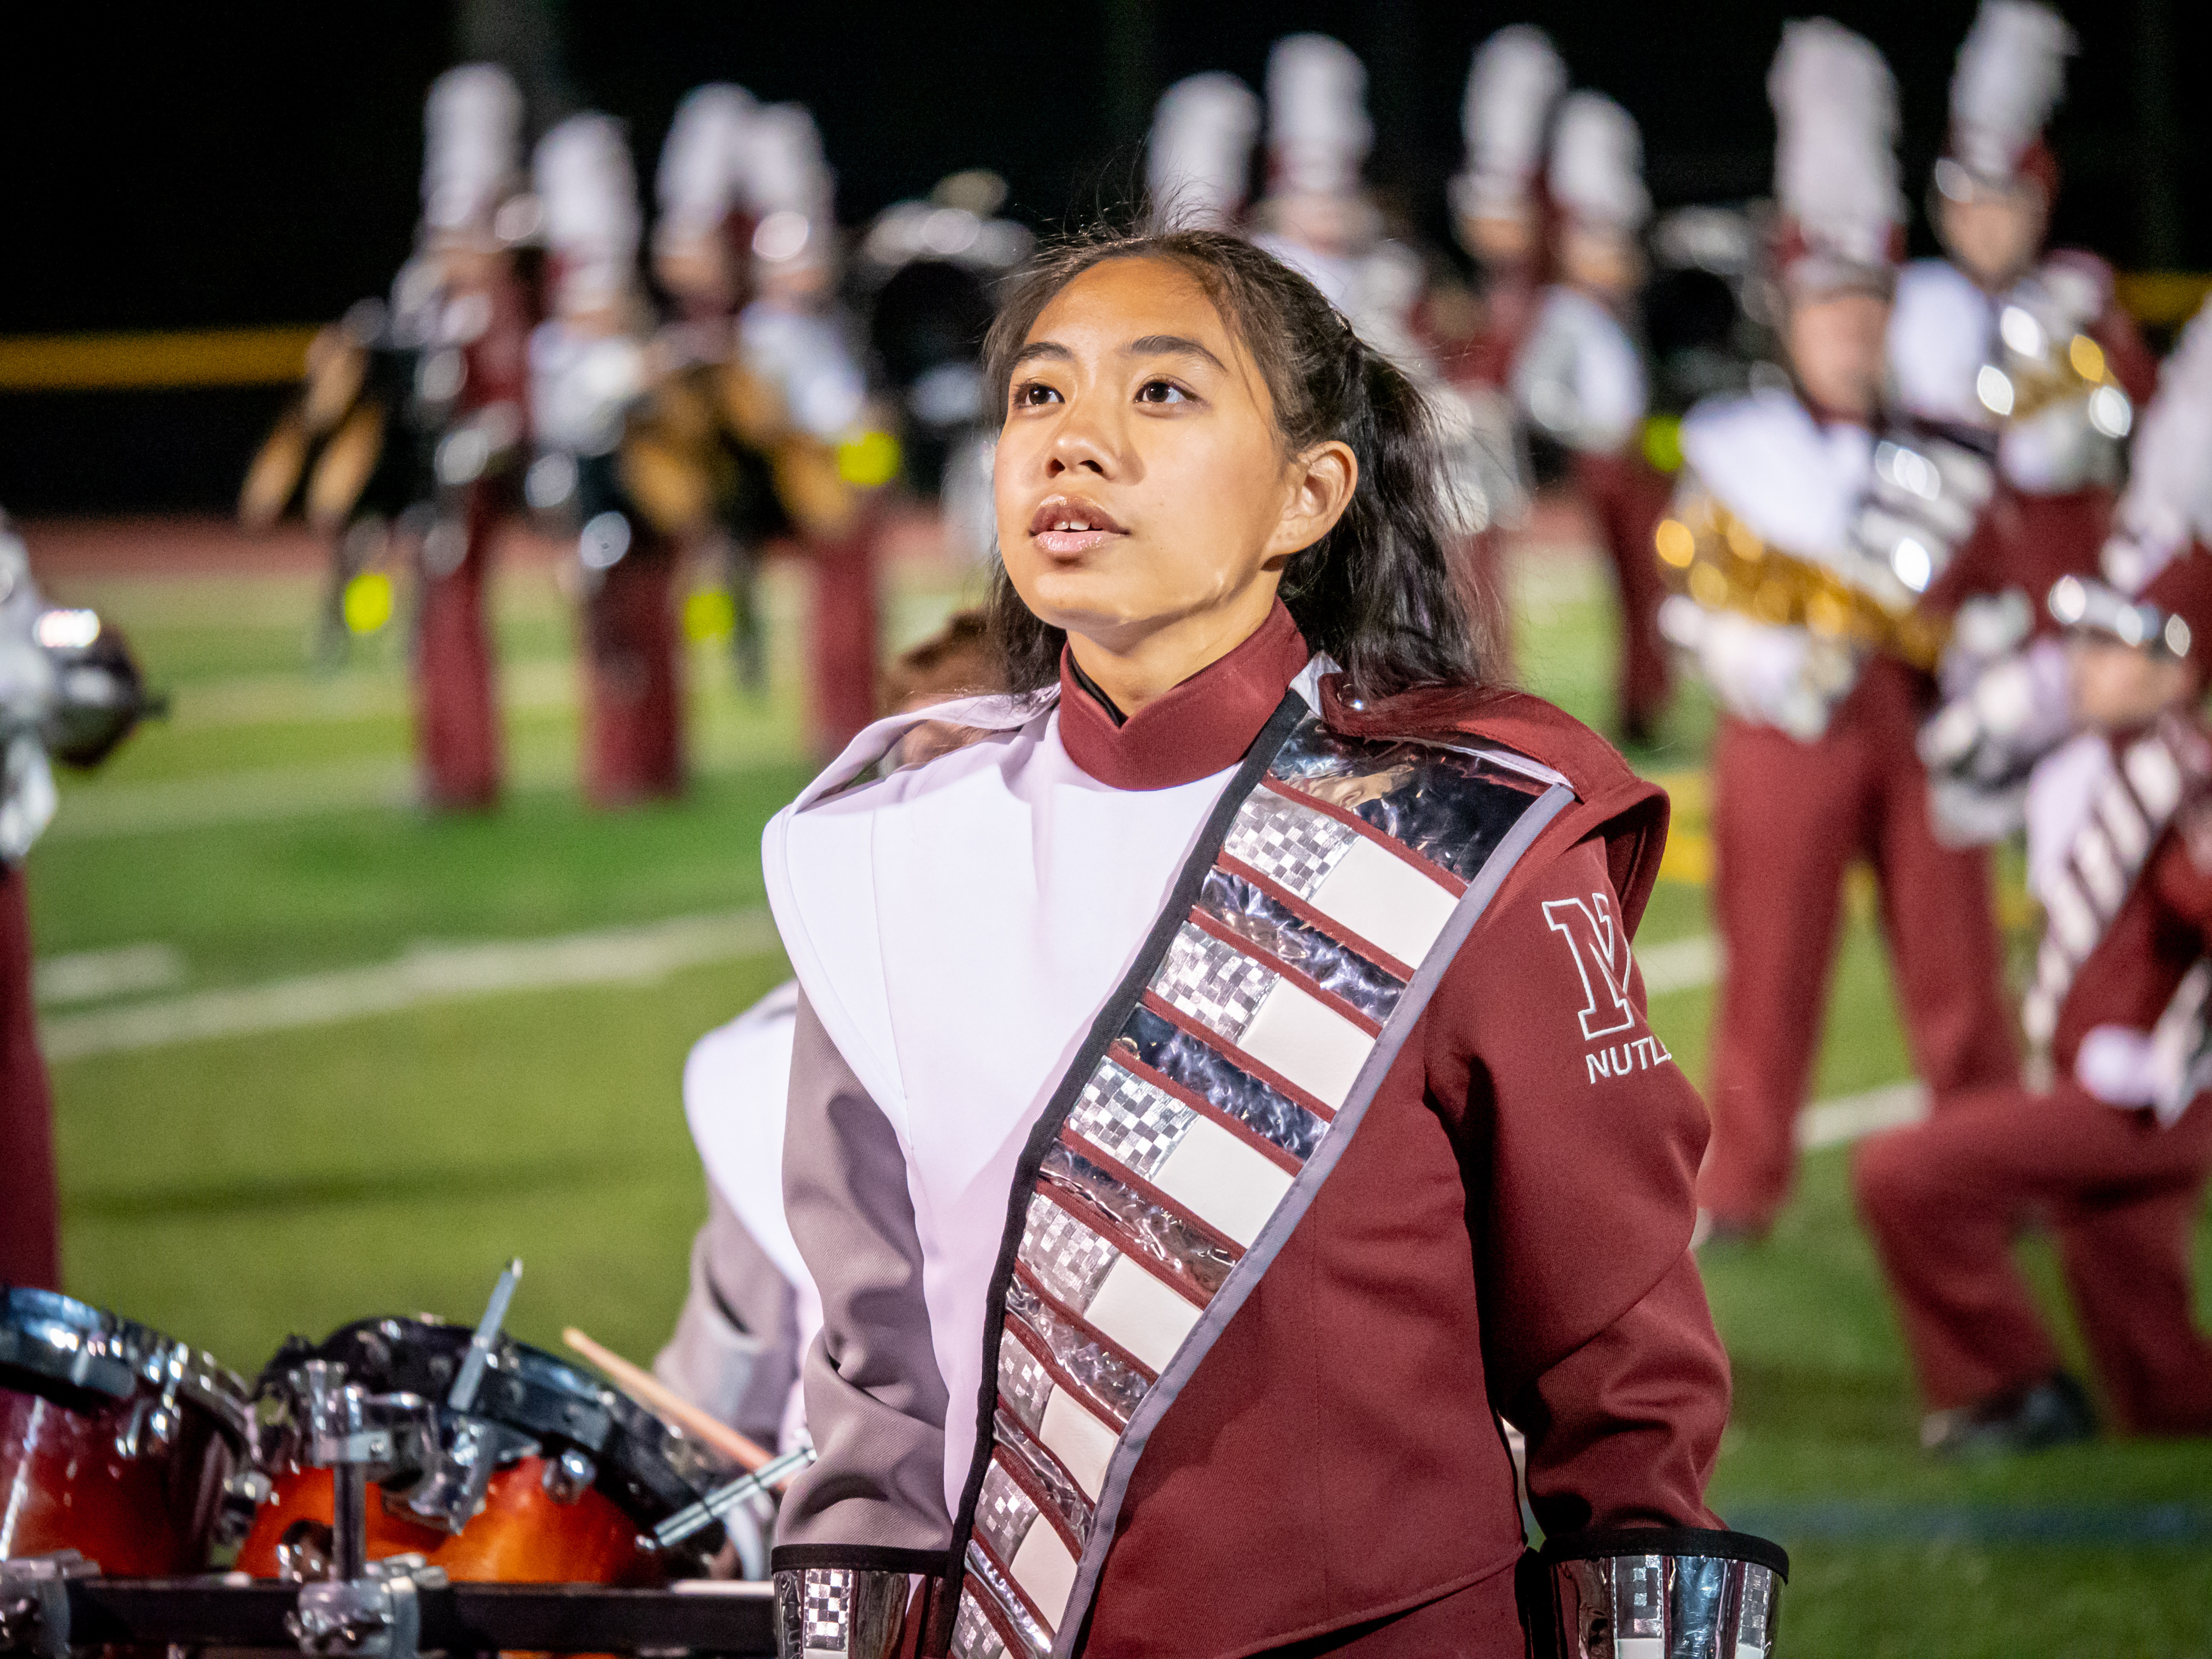 Nutley HS marching band thrilled to be back on the field – Essex News Daily